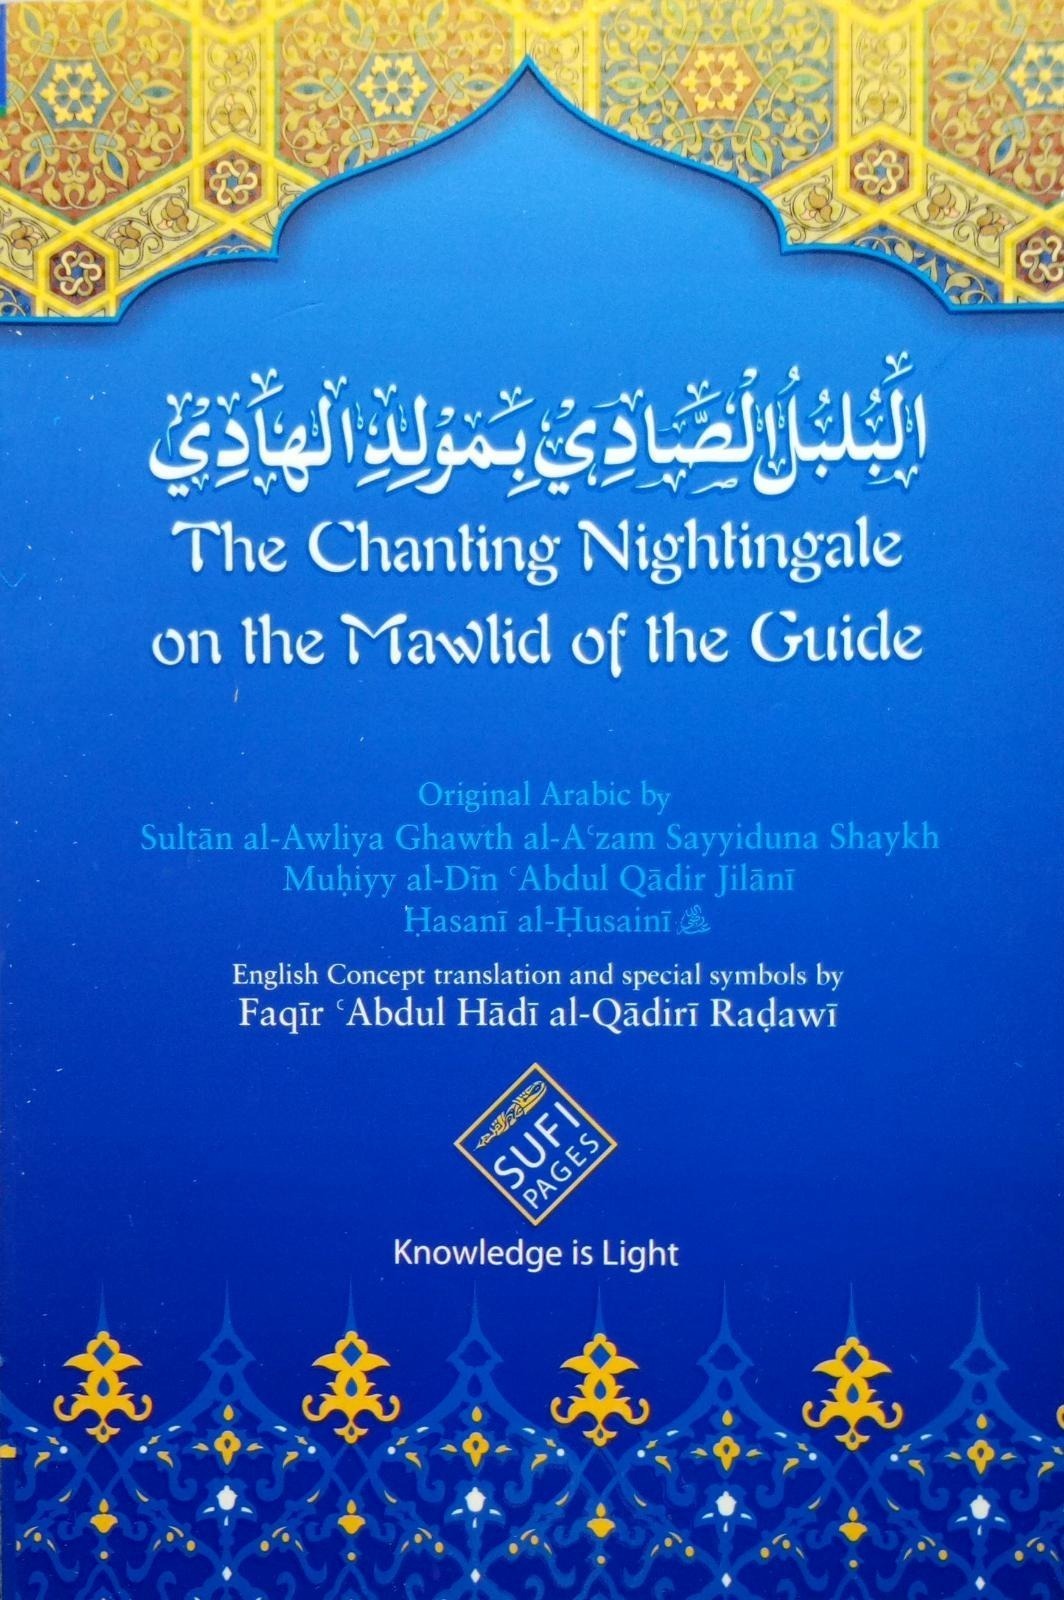 The Chanting Nightingale on the Mawlid of the Guide